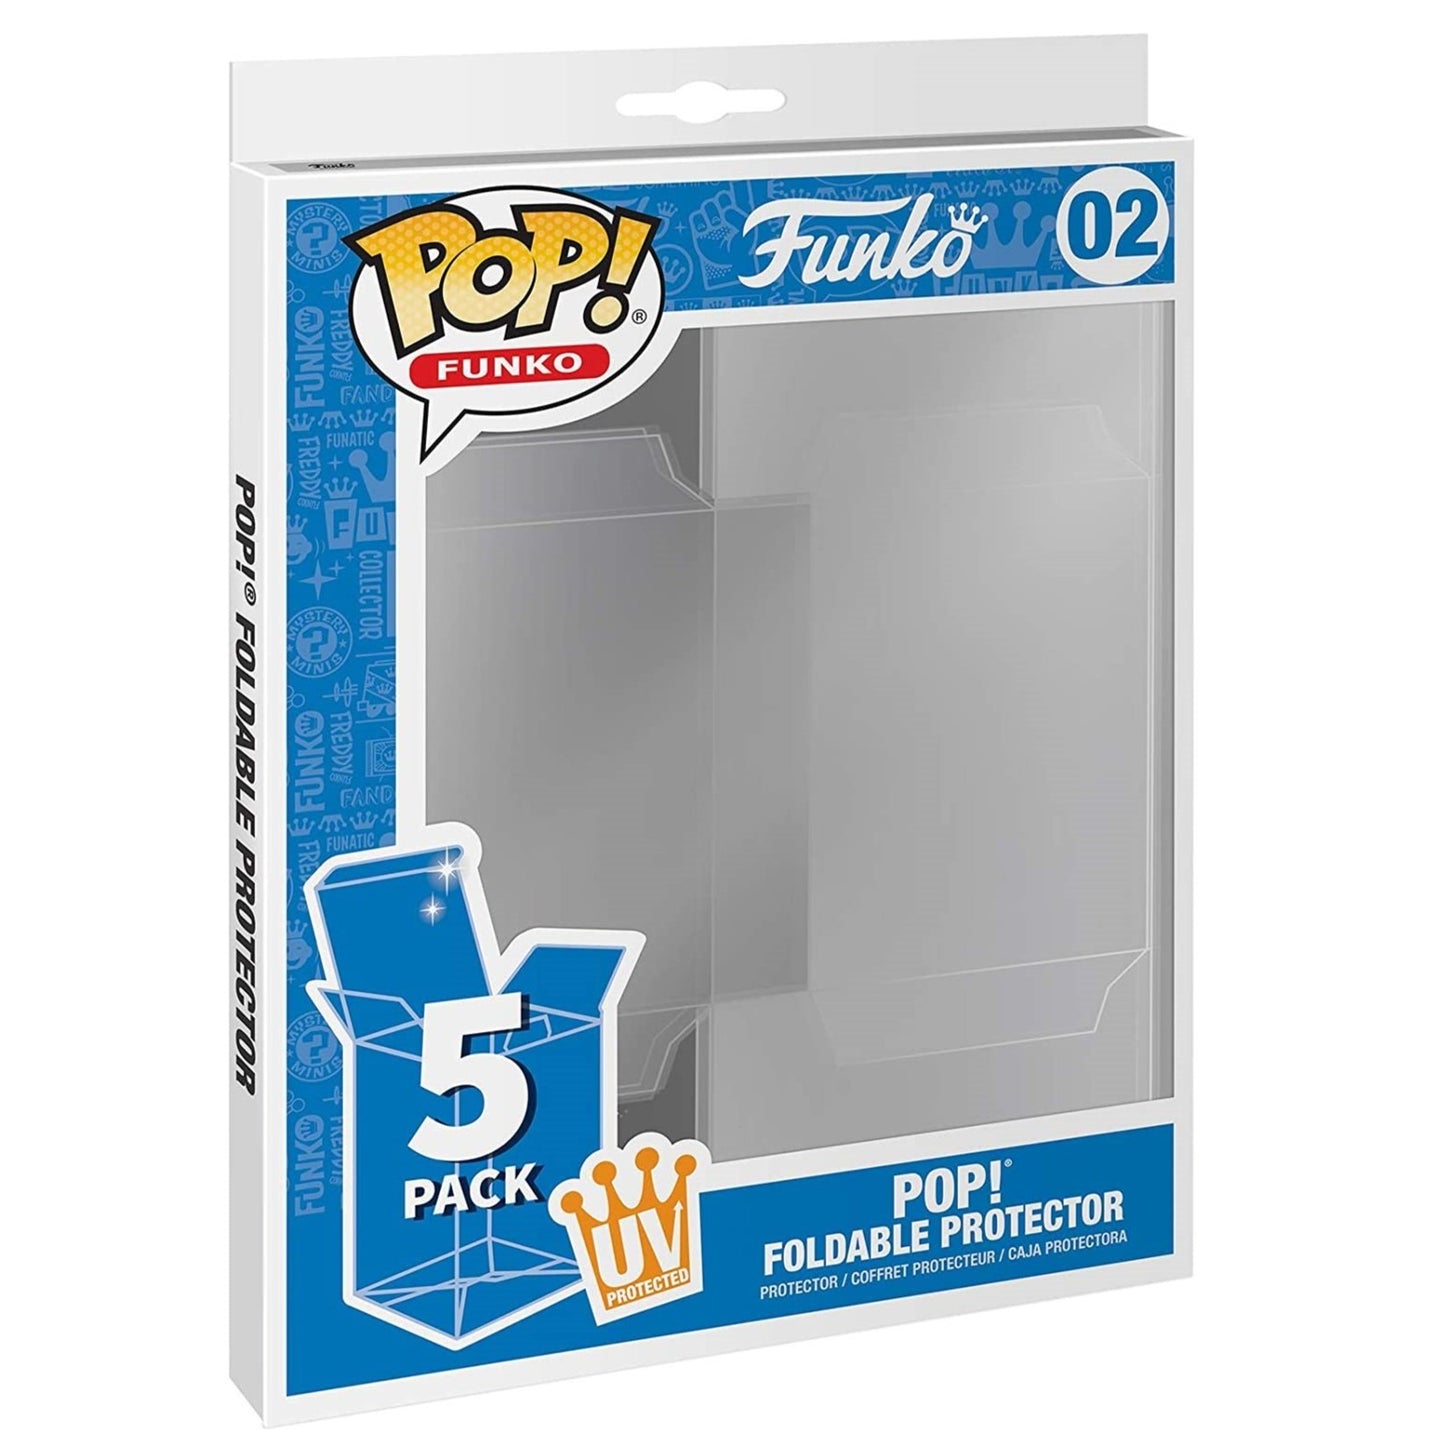 Funko foldable 3 3/4 inch protector 5pc pack